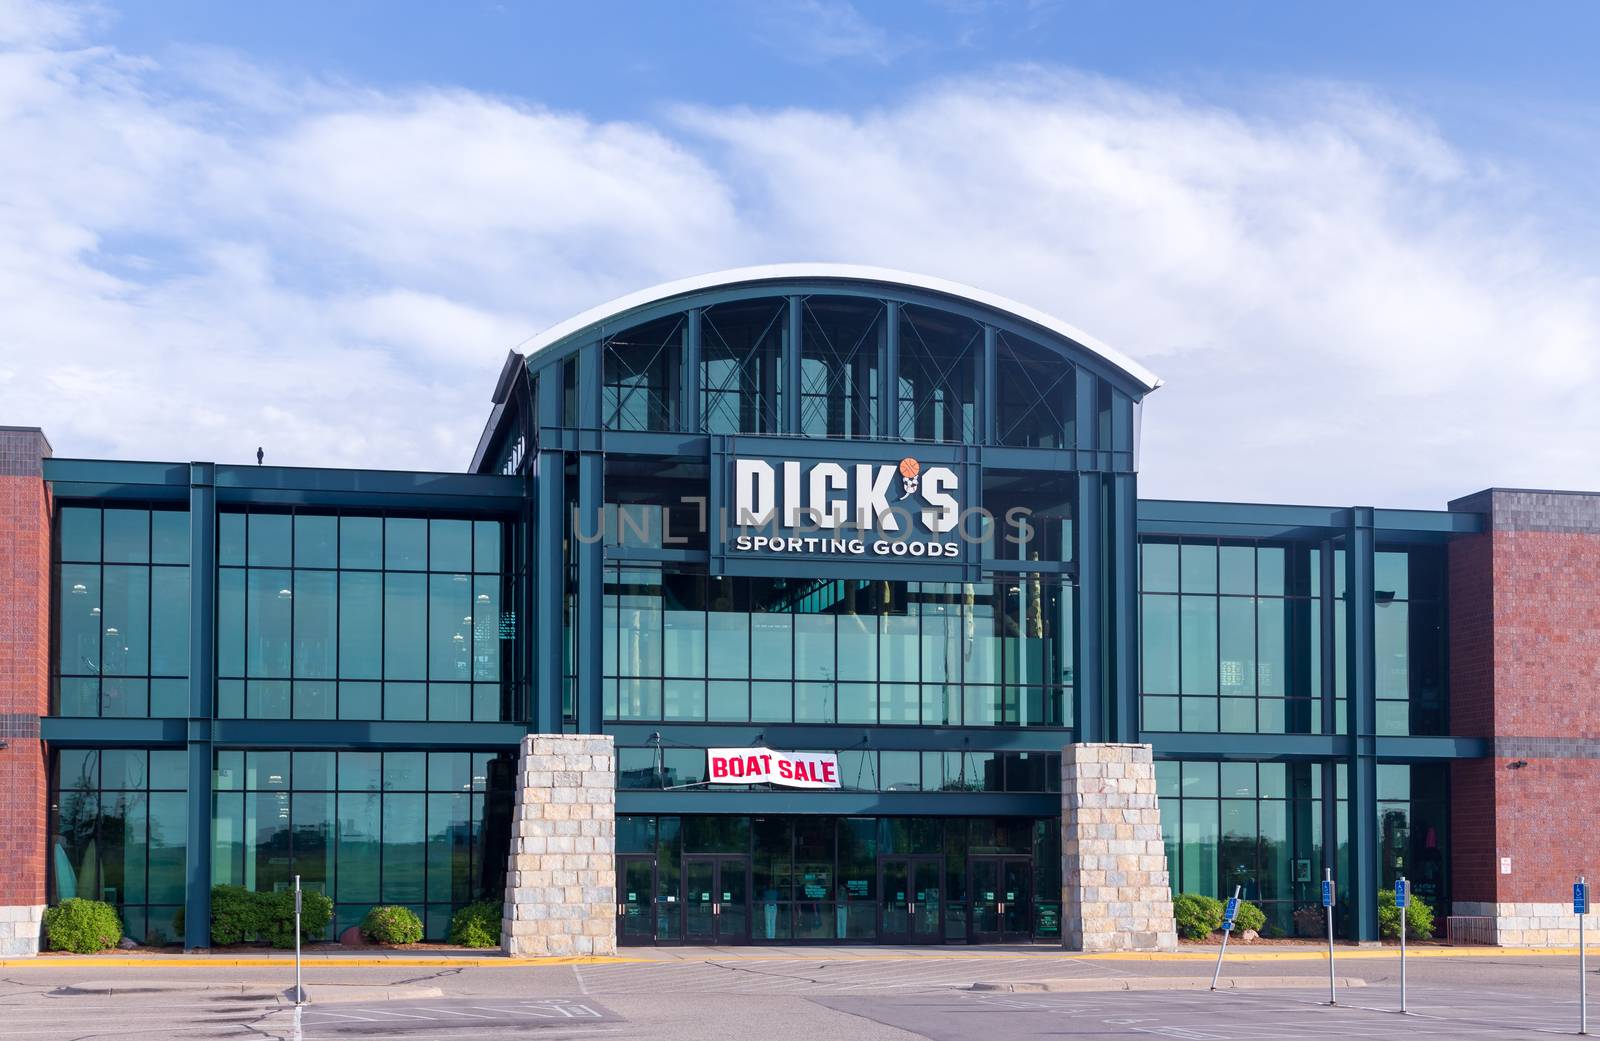 Dick's Sporting Goods Exterior by wolterk